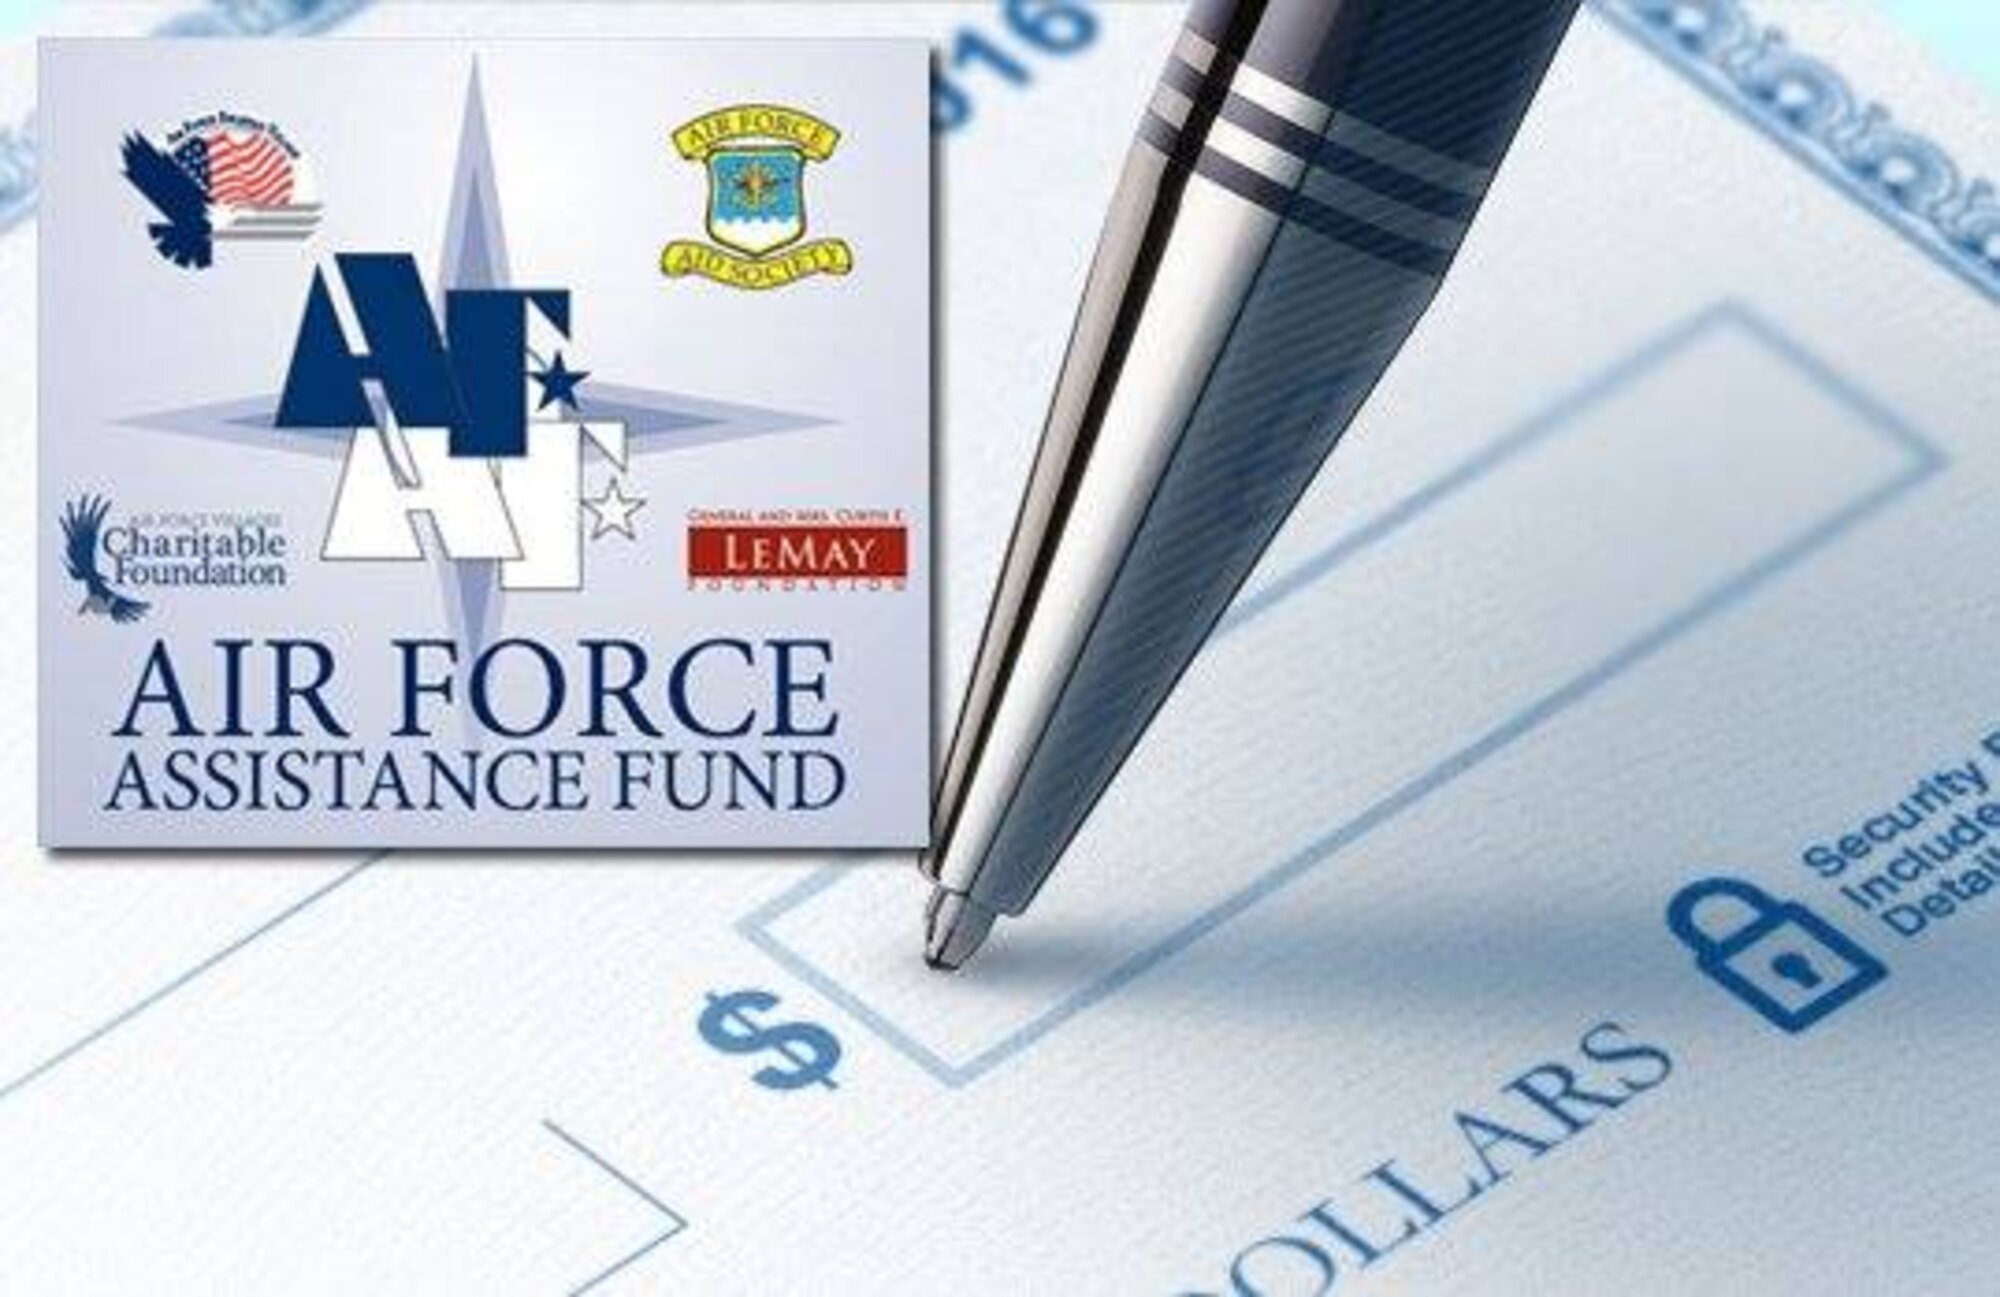 The 2016 Air Force Assistance Fund Campaign will take place here March 21 through April 29. The goal for this year's Hanscom campaign is $39,552.
